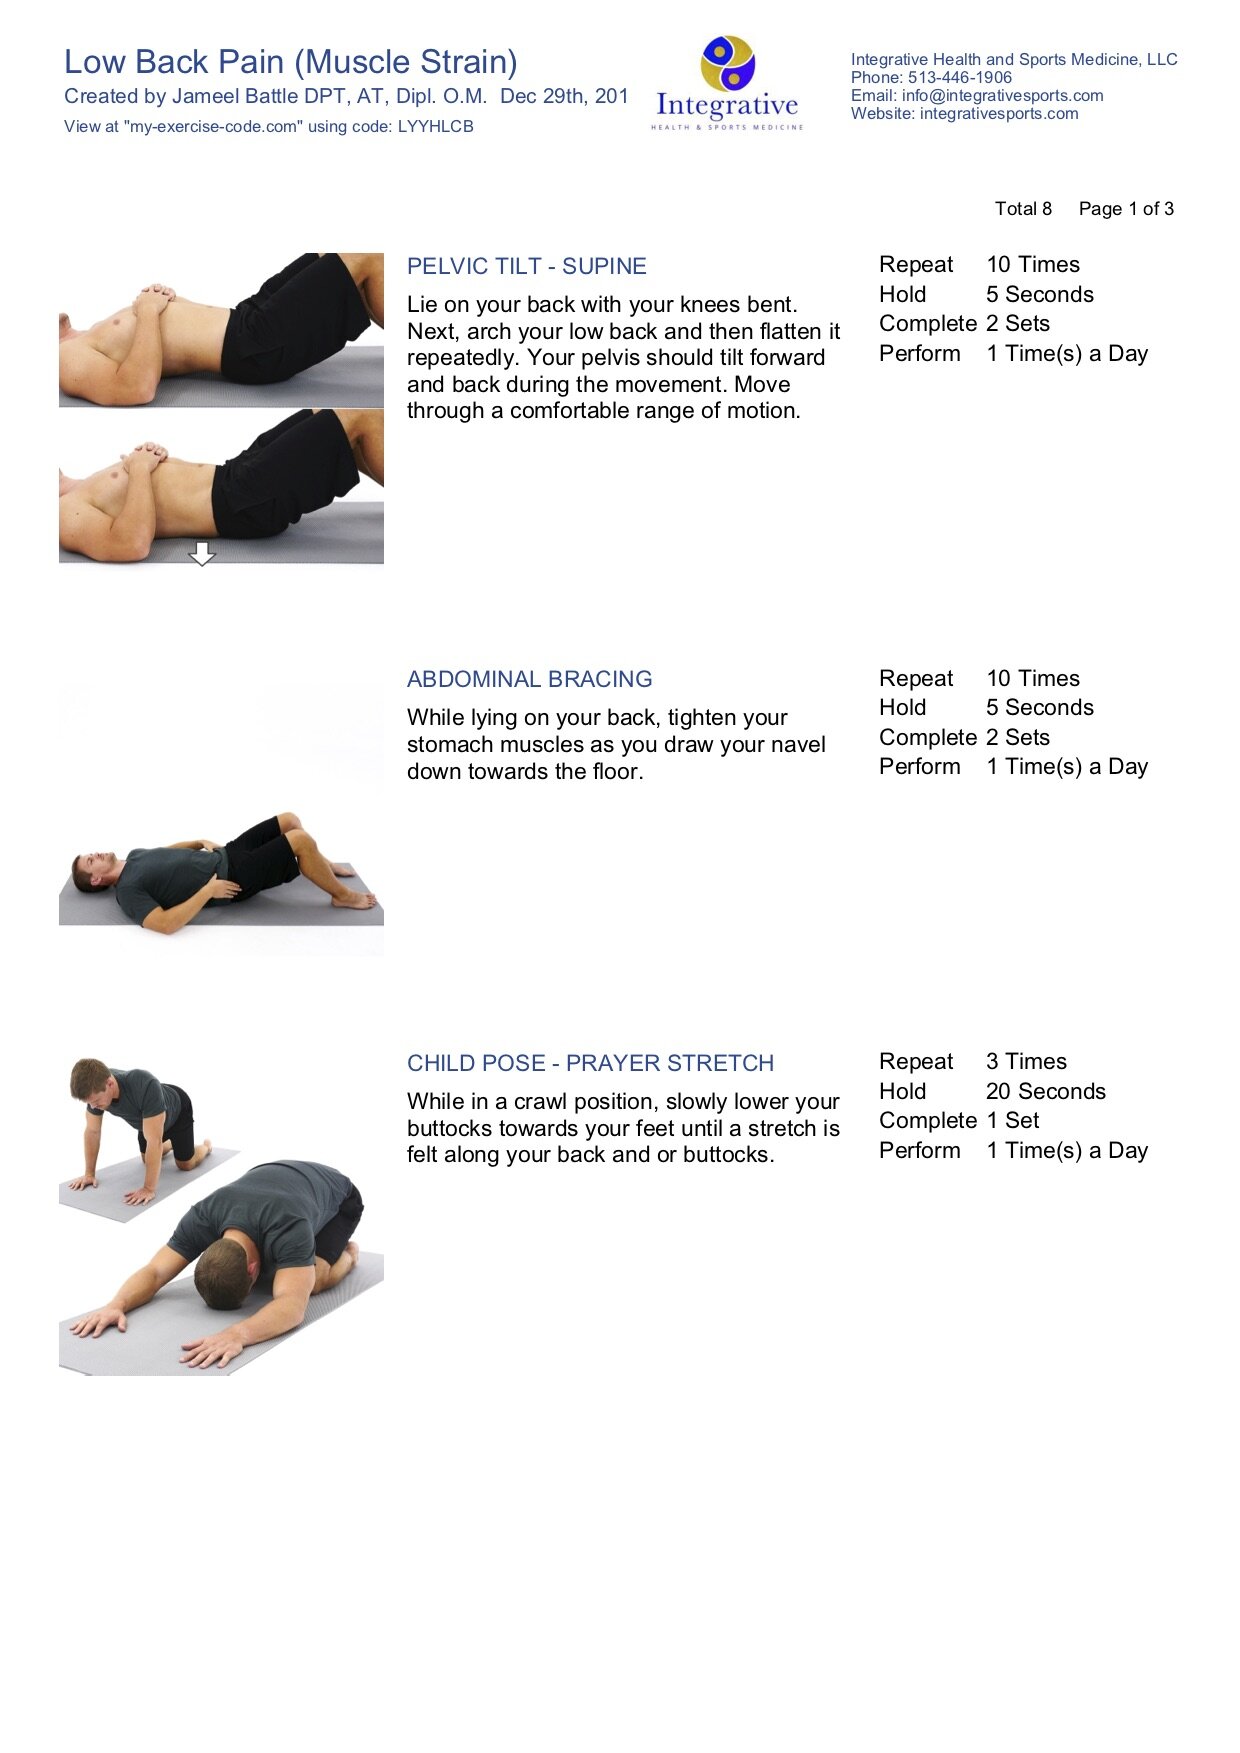 Low Back Pain Exercises for Pain Relief